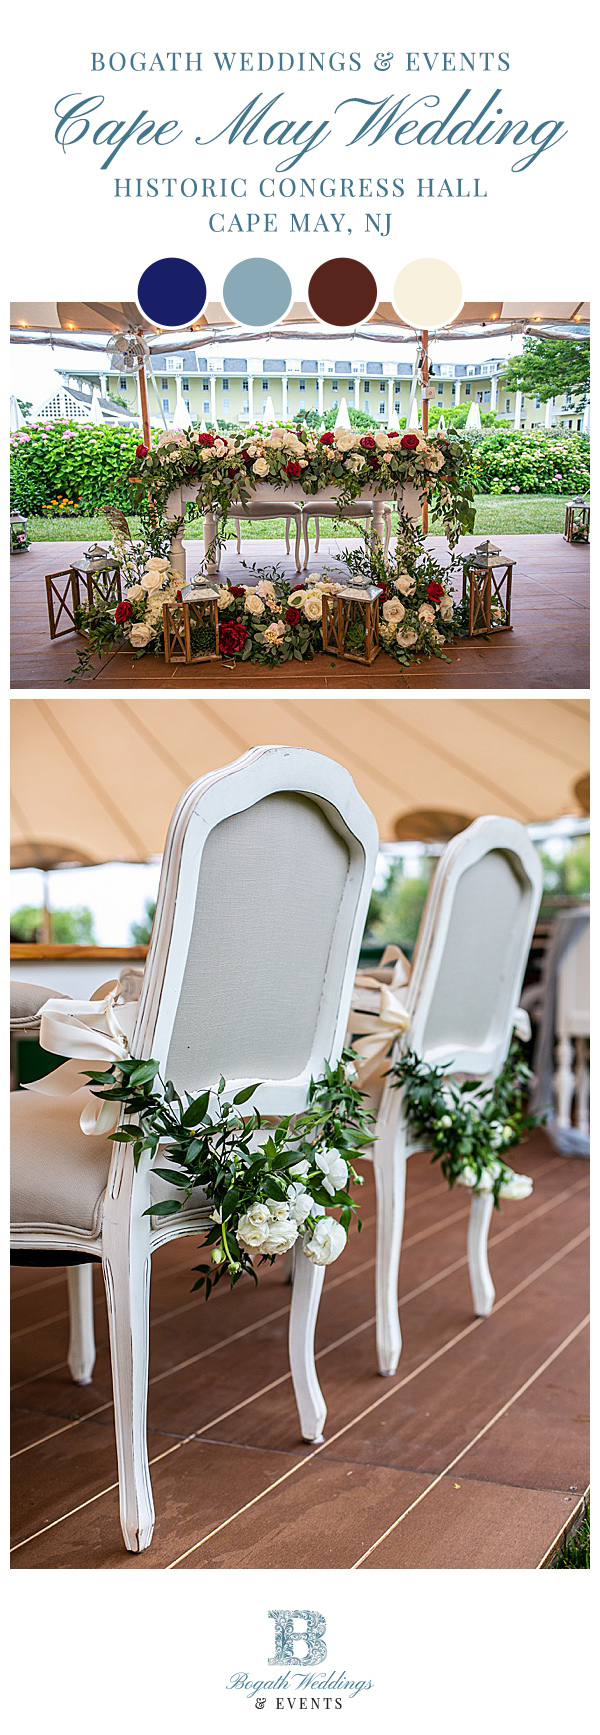 This recap of Ashley and Rob's Congress Hall wedding is not one to miss. Full of stunning details, florals and gorgeous vintage furniture for cocktail hour, this tented reception on the Great Lawn at Congress Hall in Cape May, NJ will leave you swooning. Photos by Ann Coen Photography